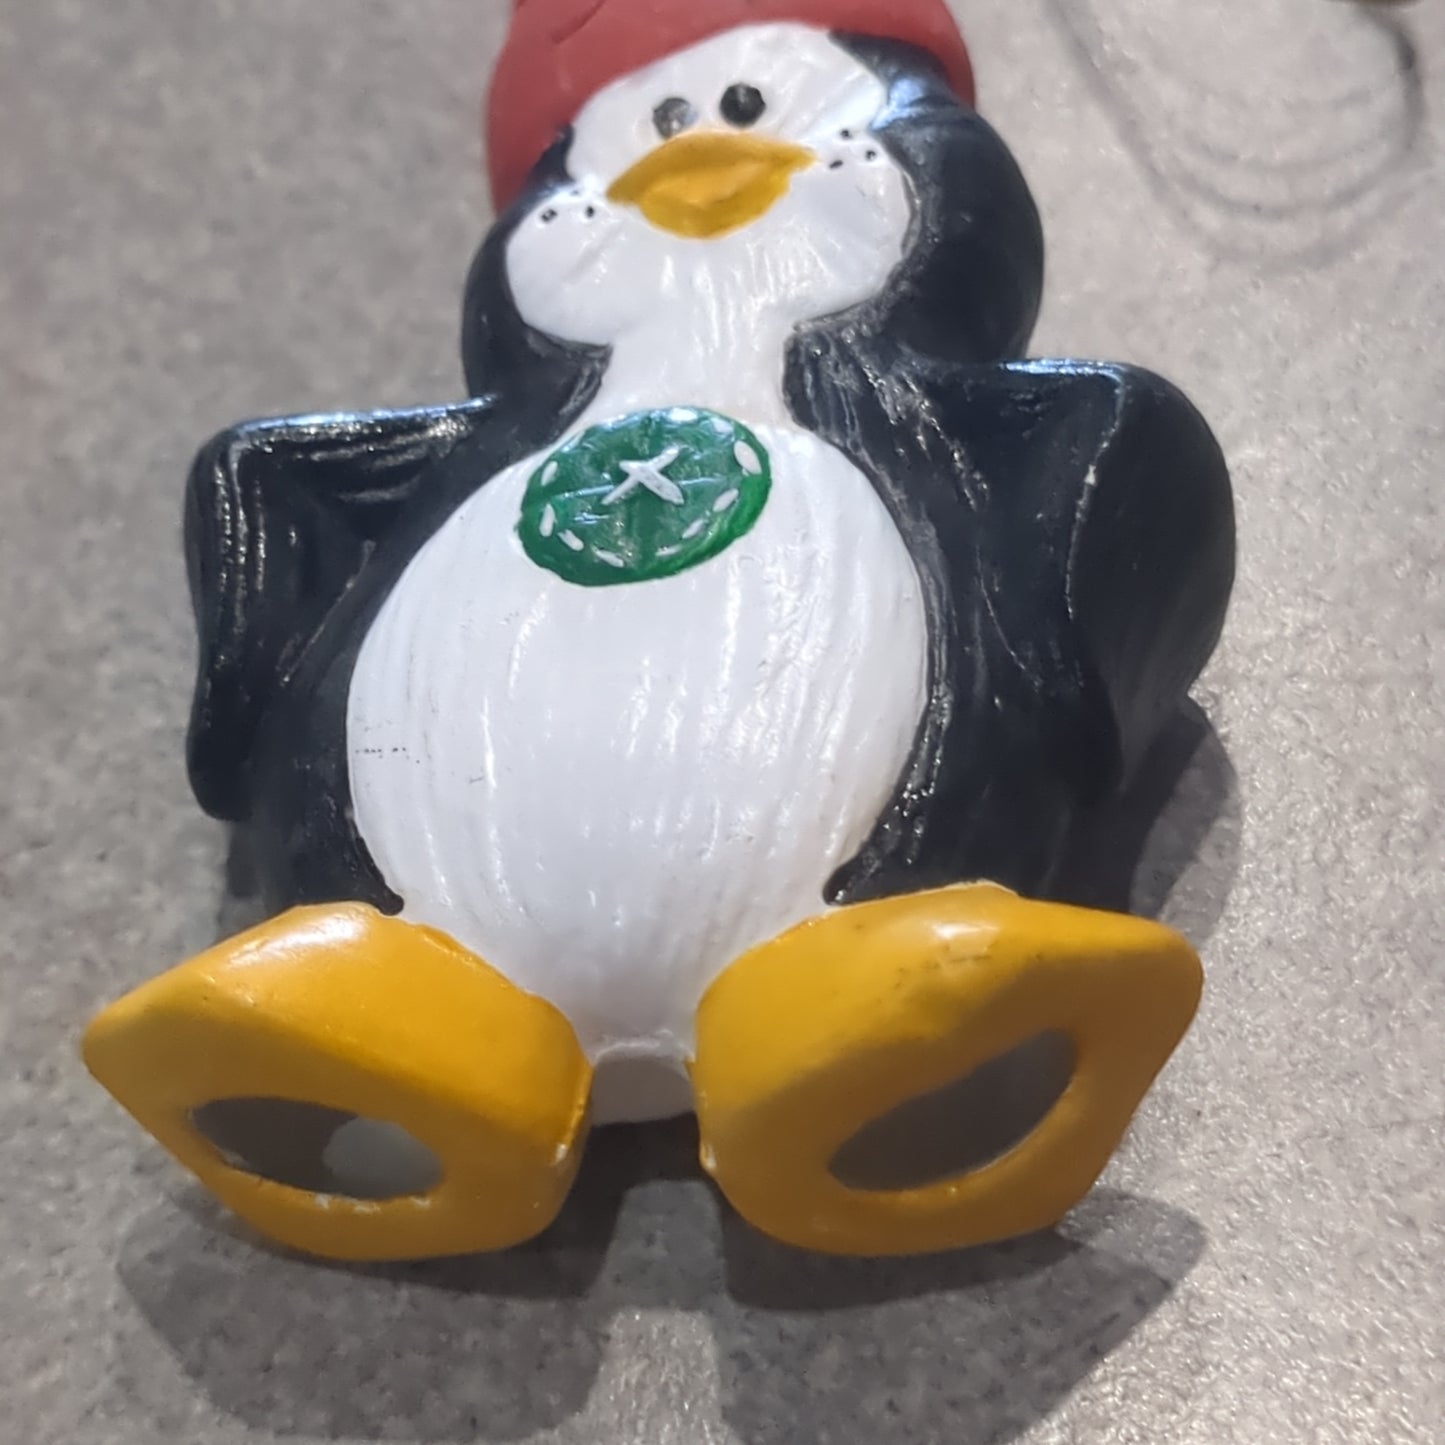 Ceramic penguin ornament with a pot on his head and a button on his belly